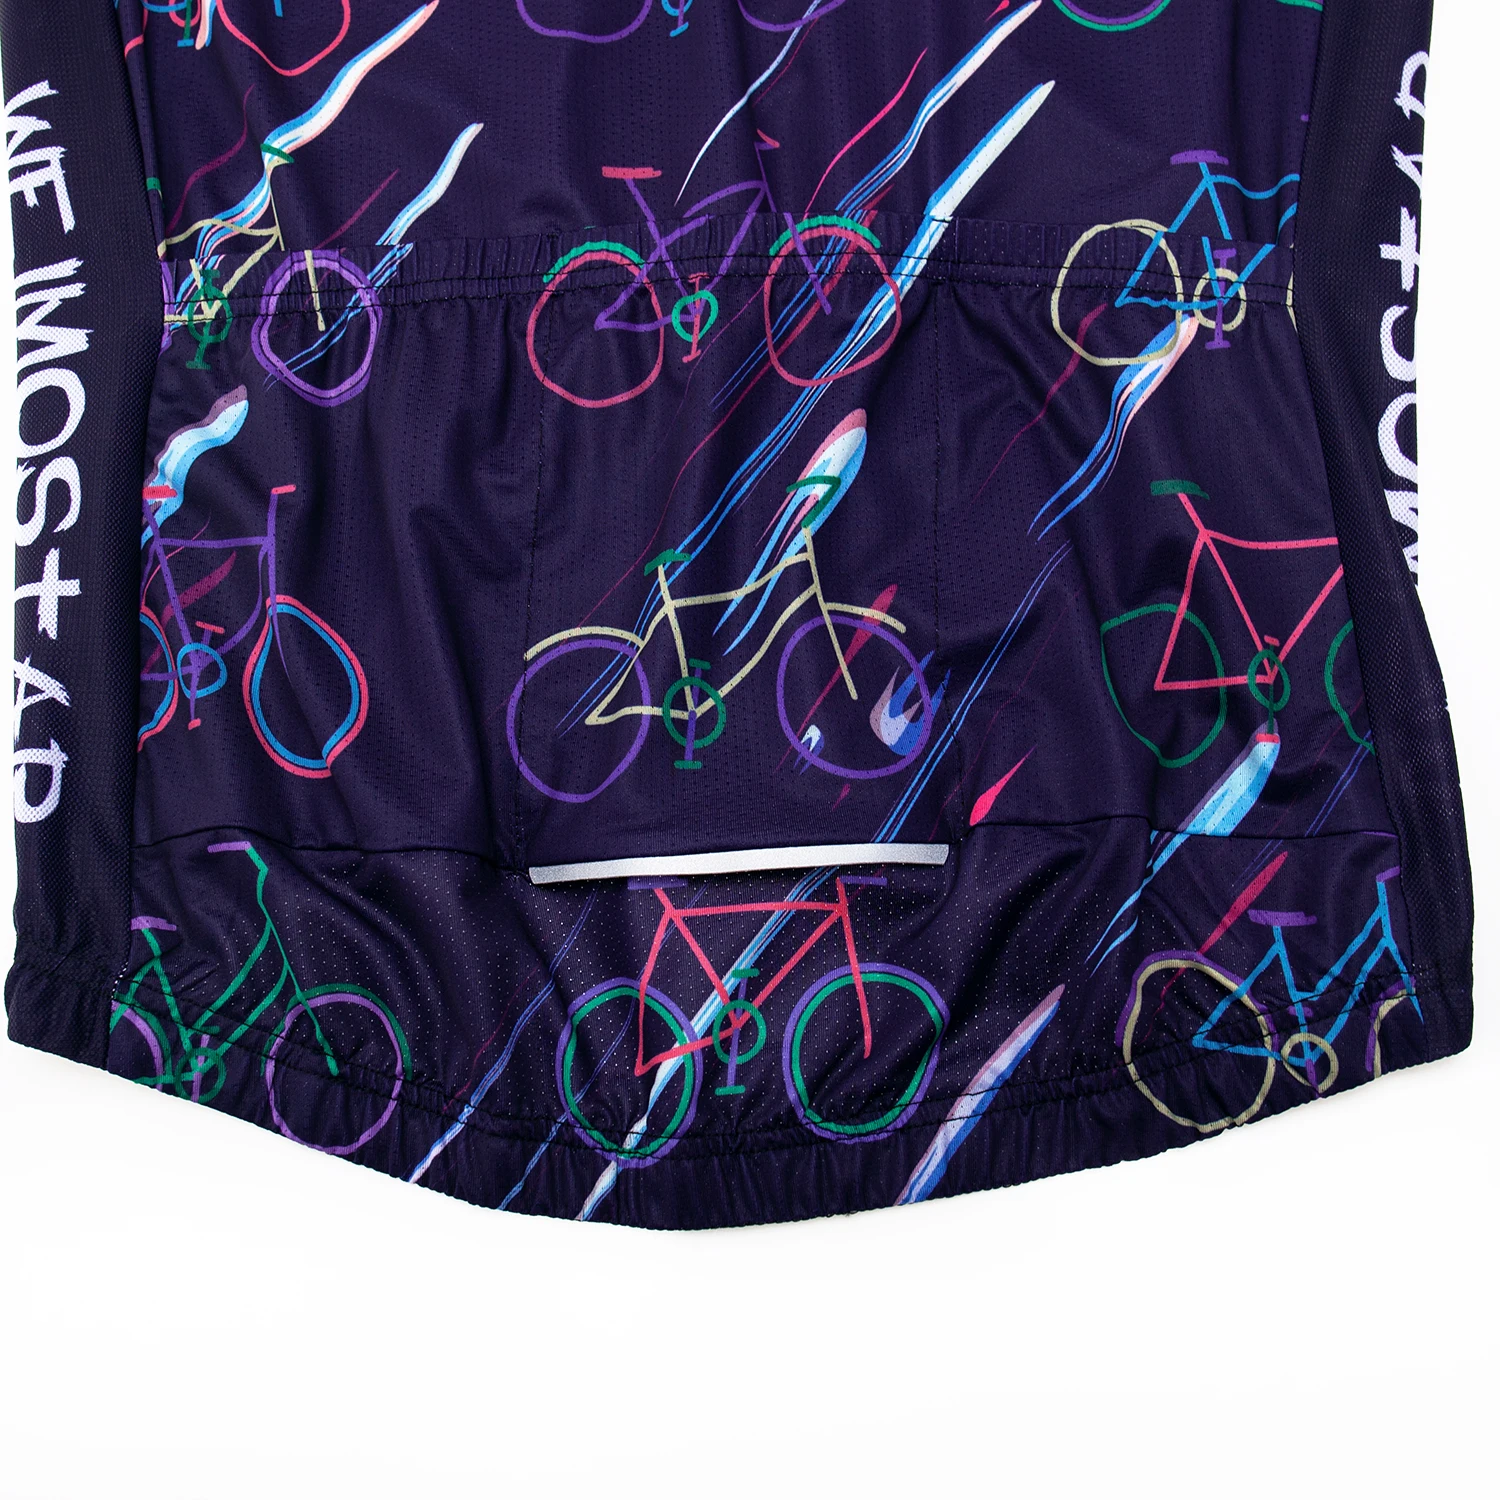 2019 trøje Mænd Cykel, MTB Cykel-Shirt mountain Road Toppe Sport racing Ropa Ciclismo tøj lilla riding wear bluse 4